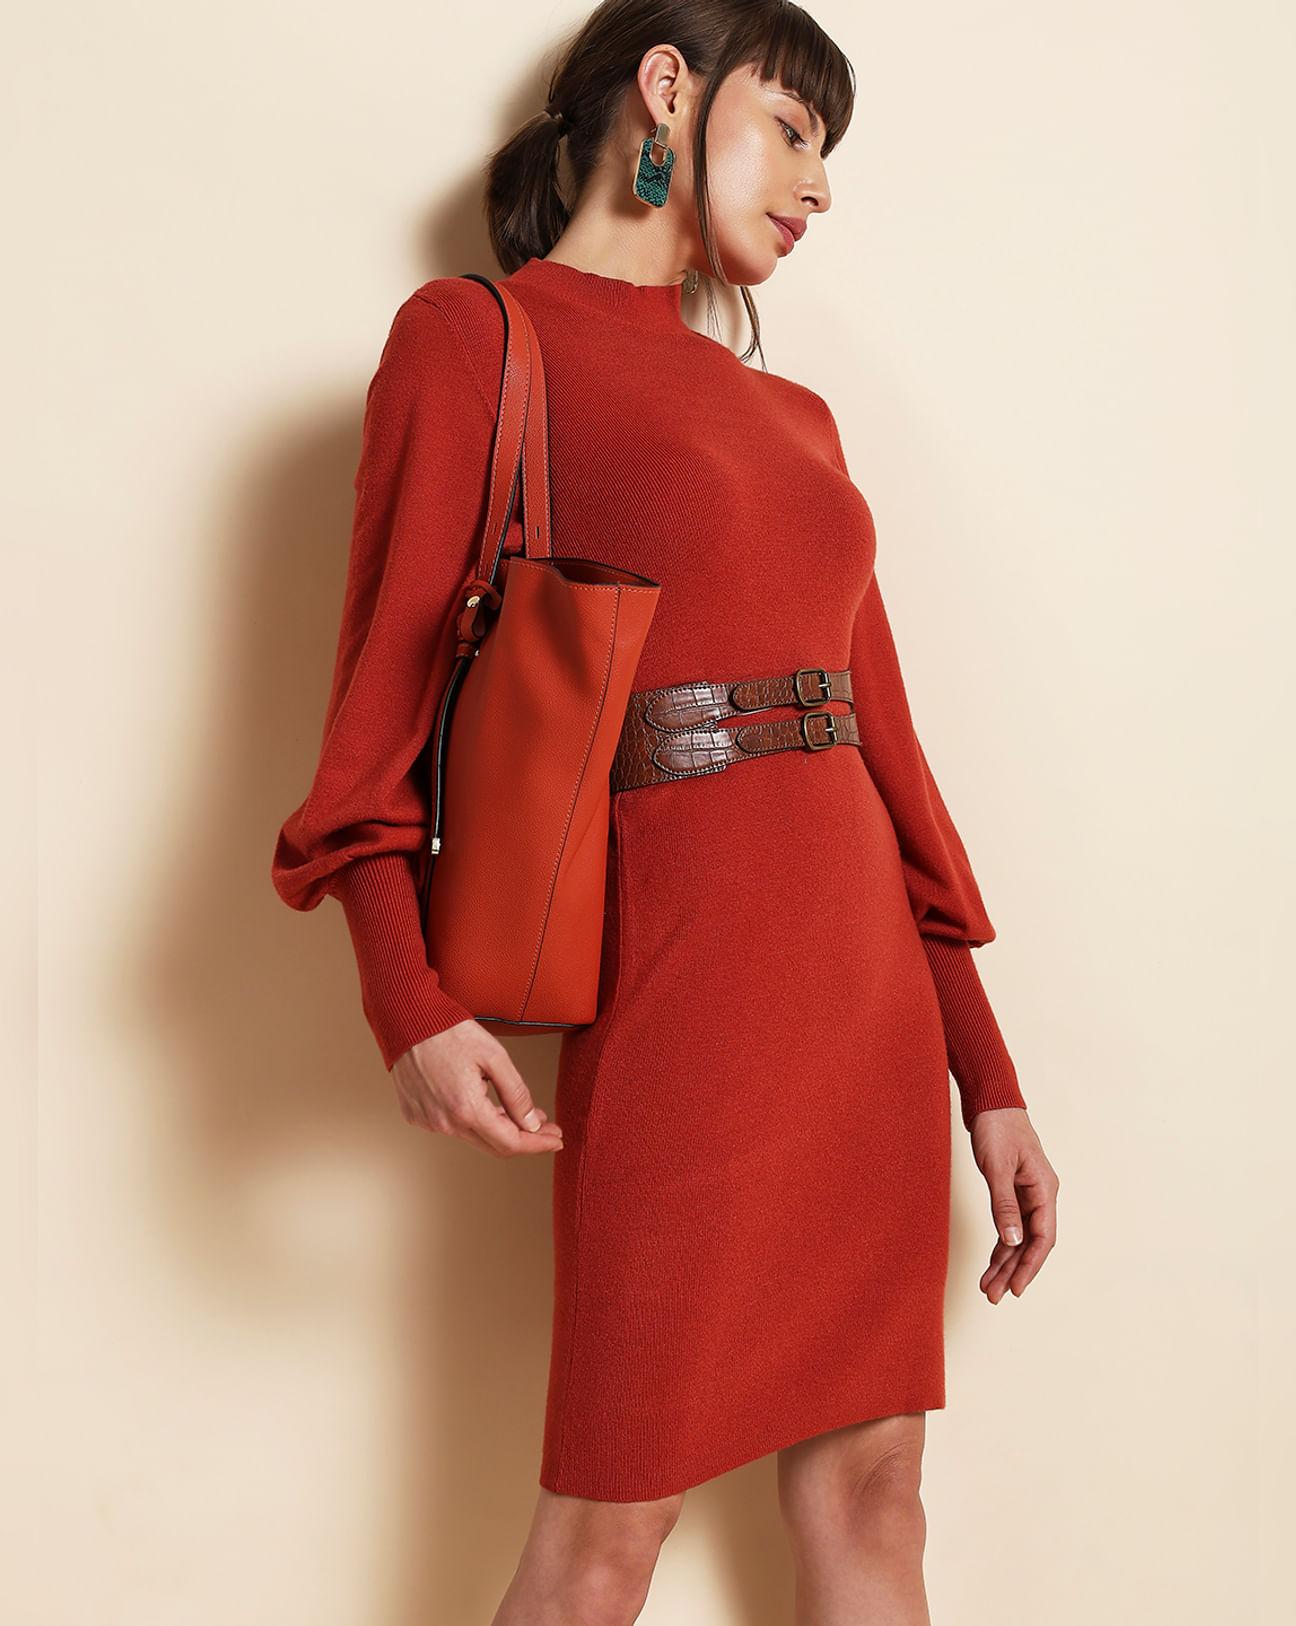 red-high-neck-bodycon-fitted-dress